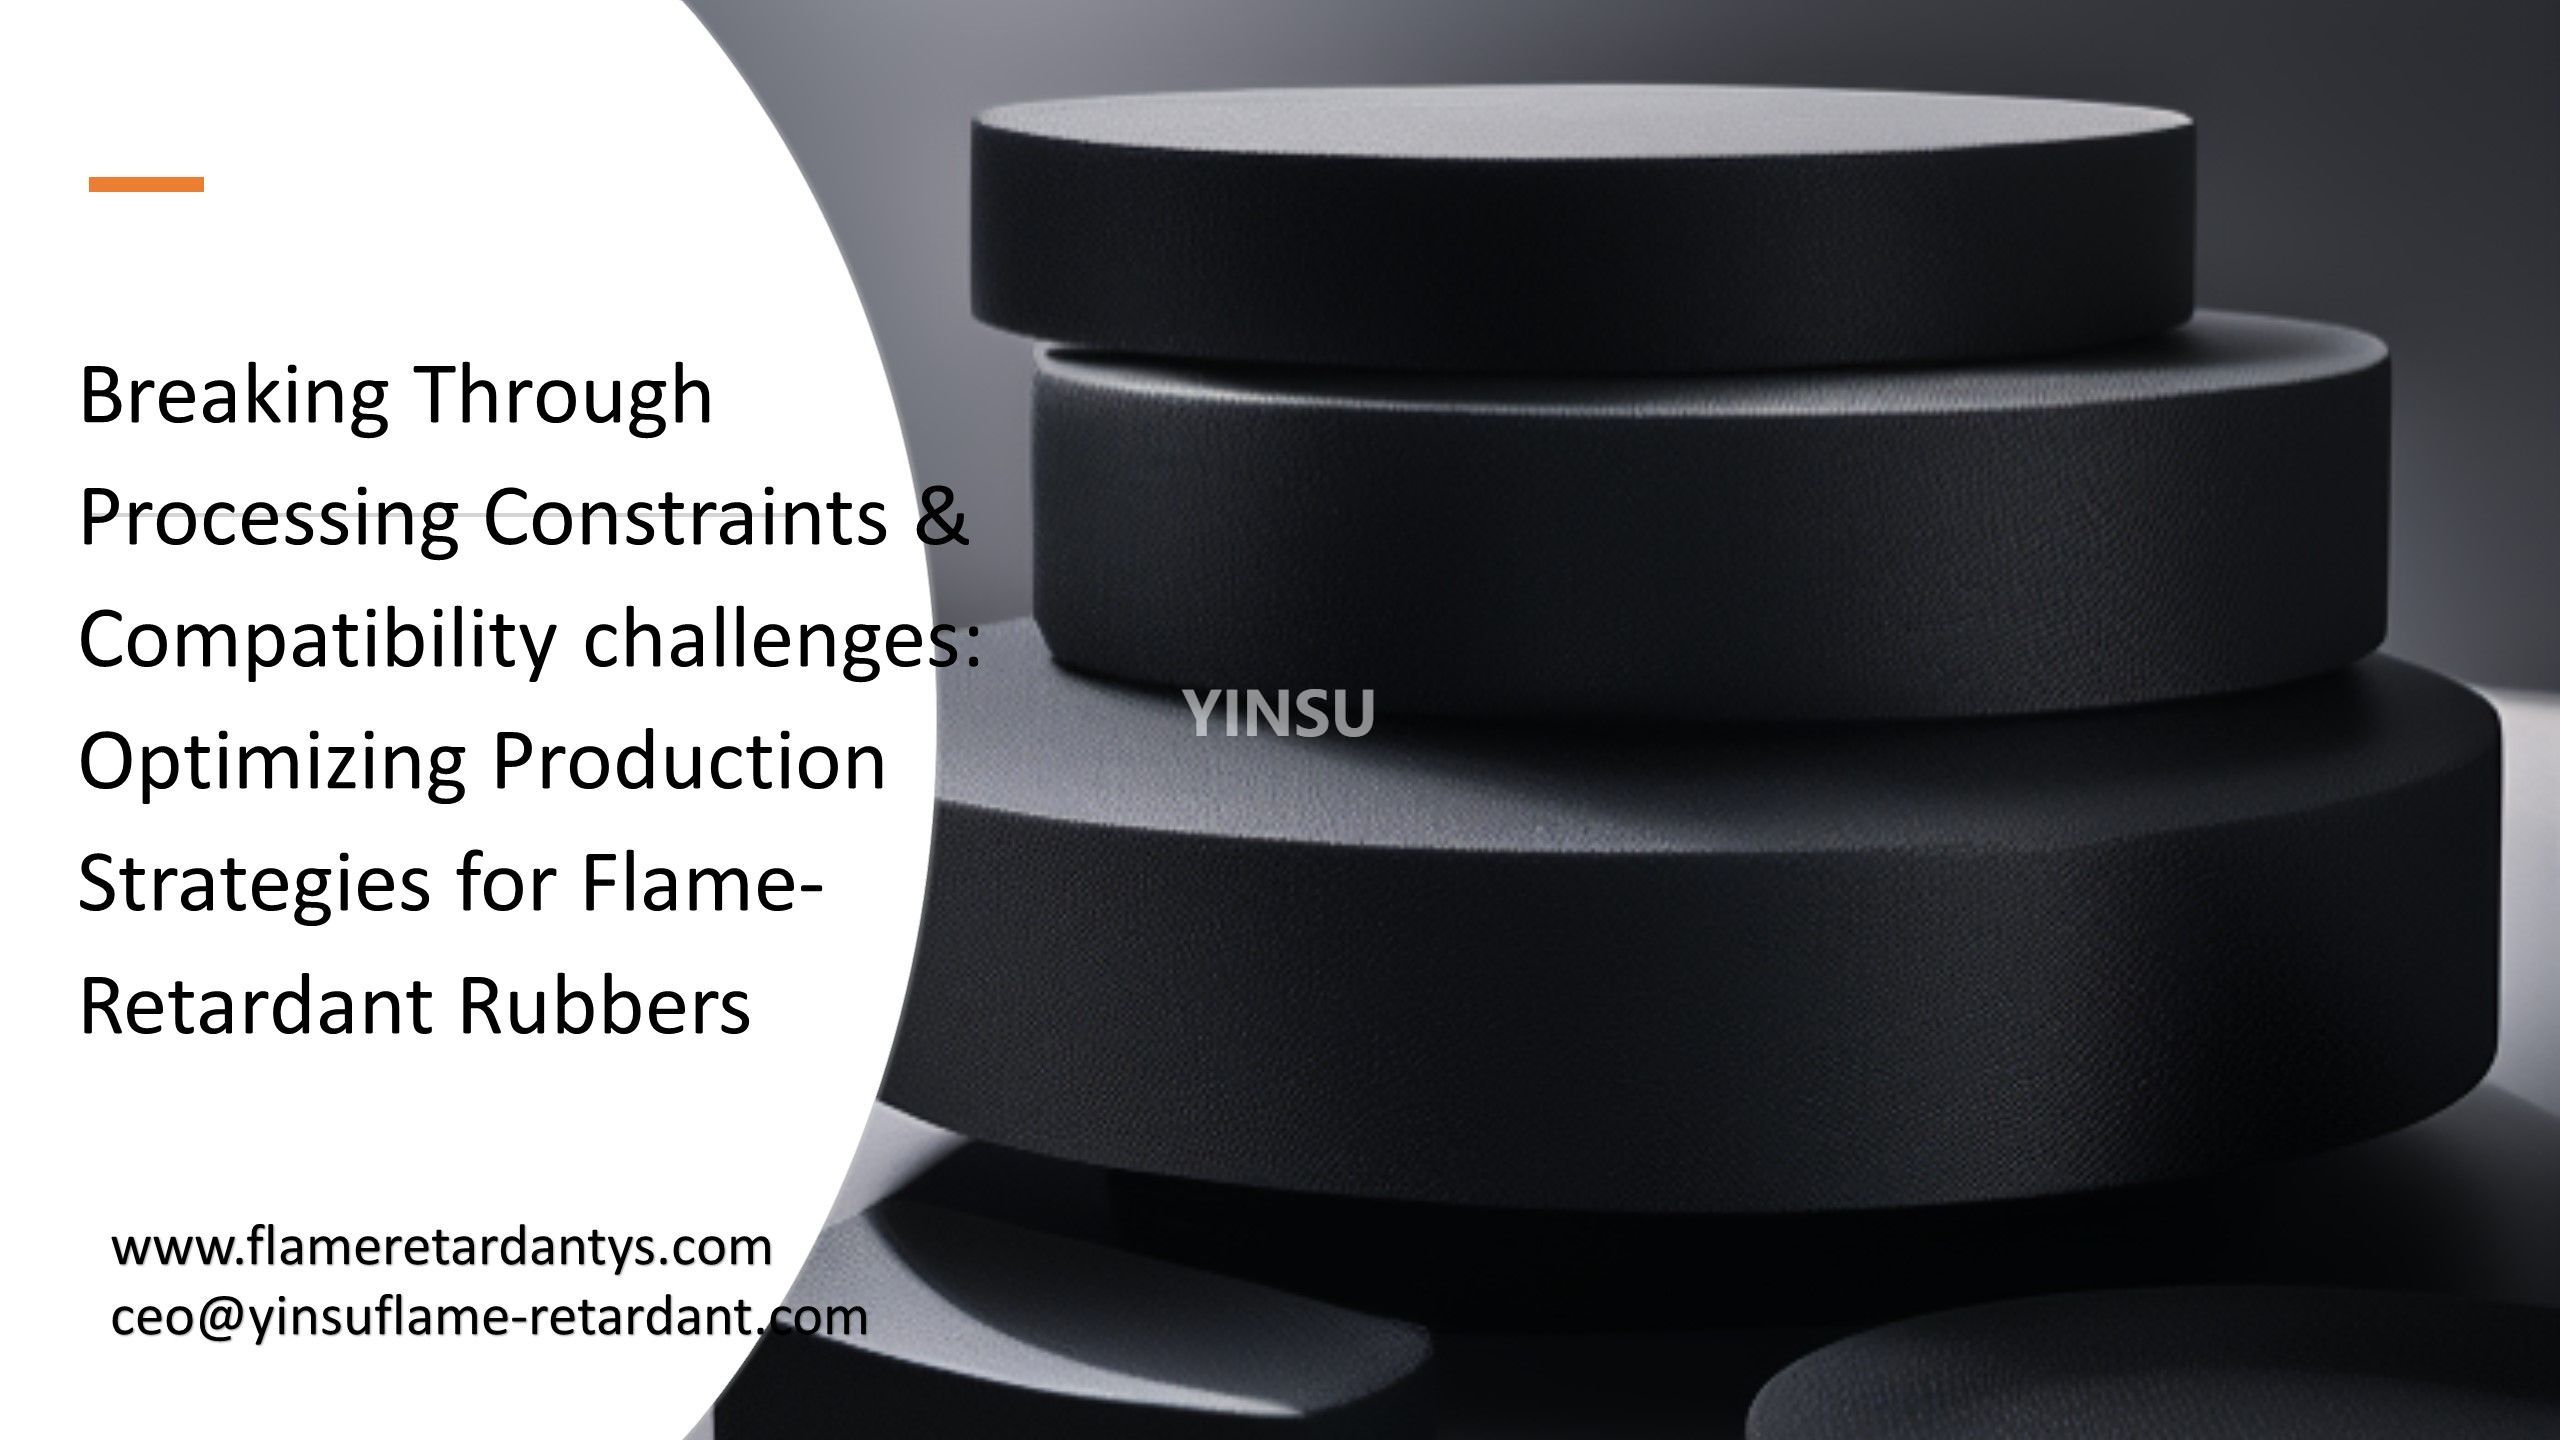 Breaking Through Processing Constraints & Compatibility challenges Optimizing Production Strategies for Flame-Retardant Rubbers